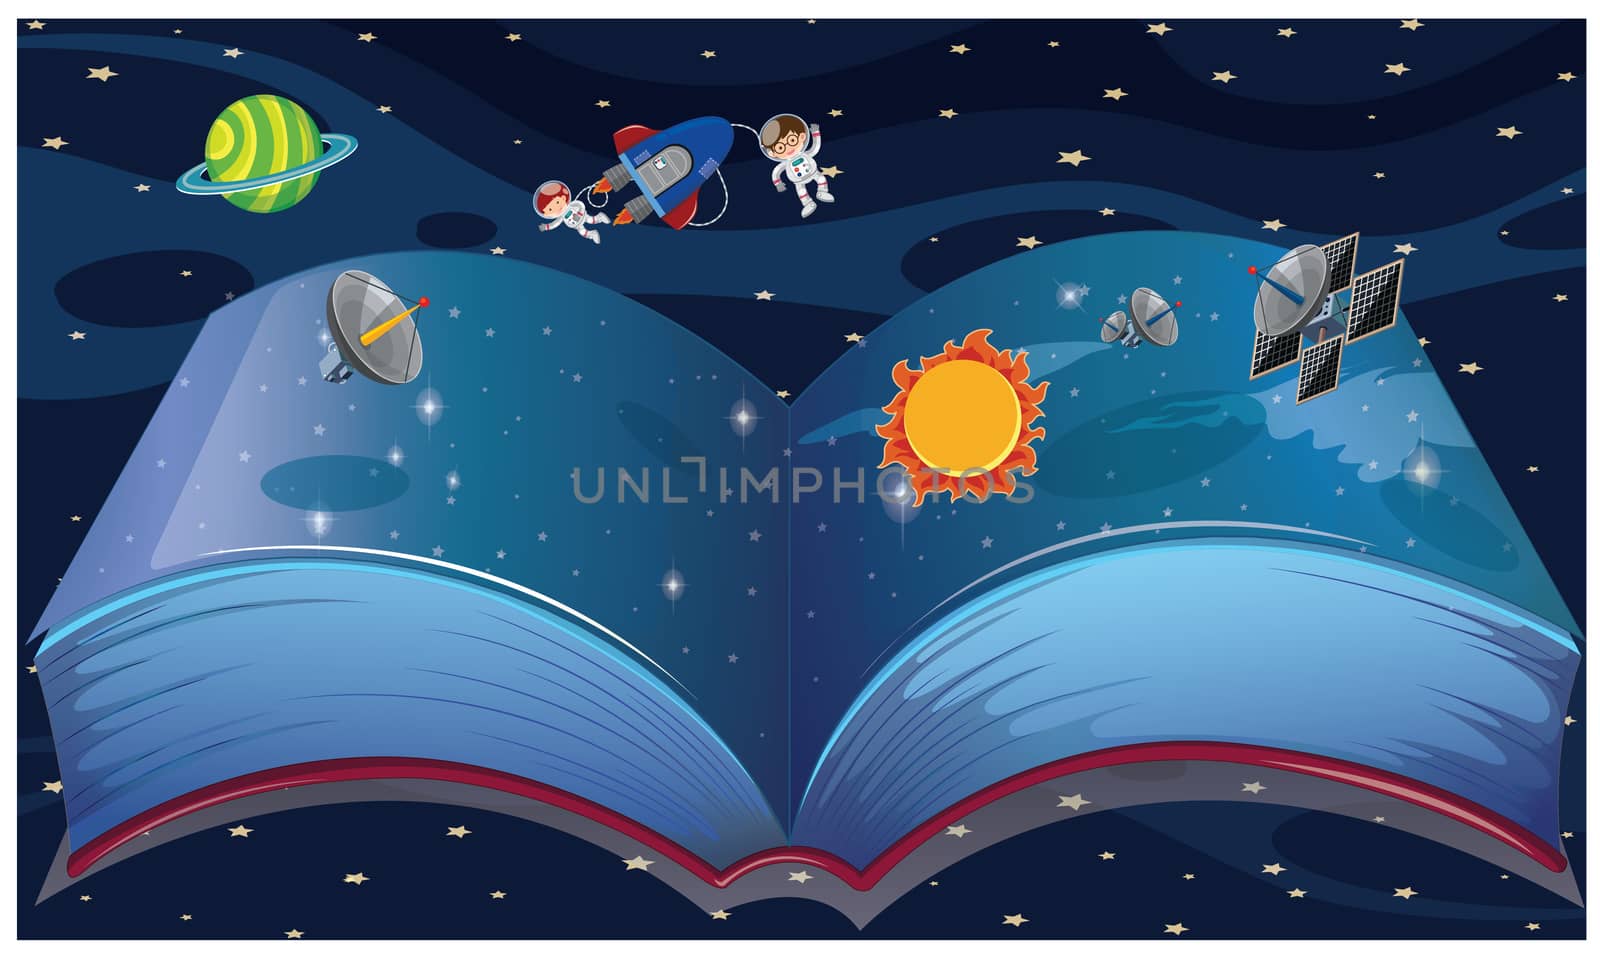 book contains complete space knowledge with actual things